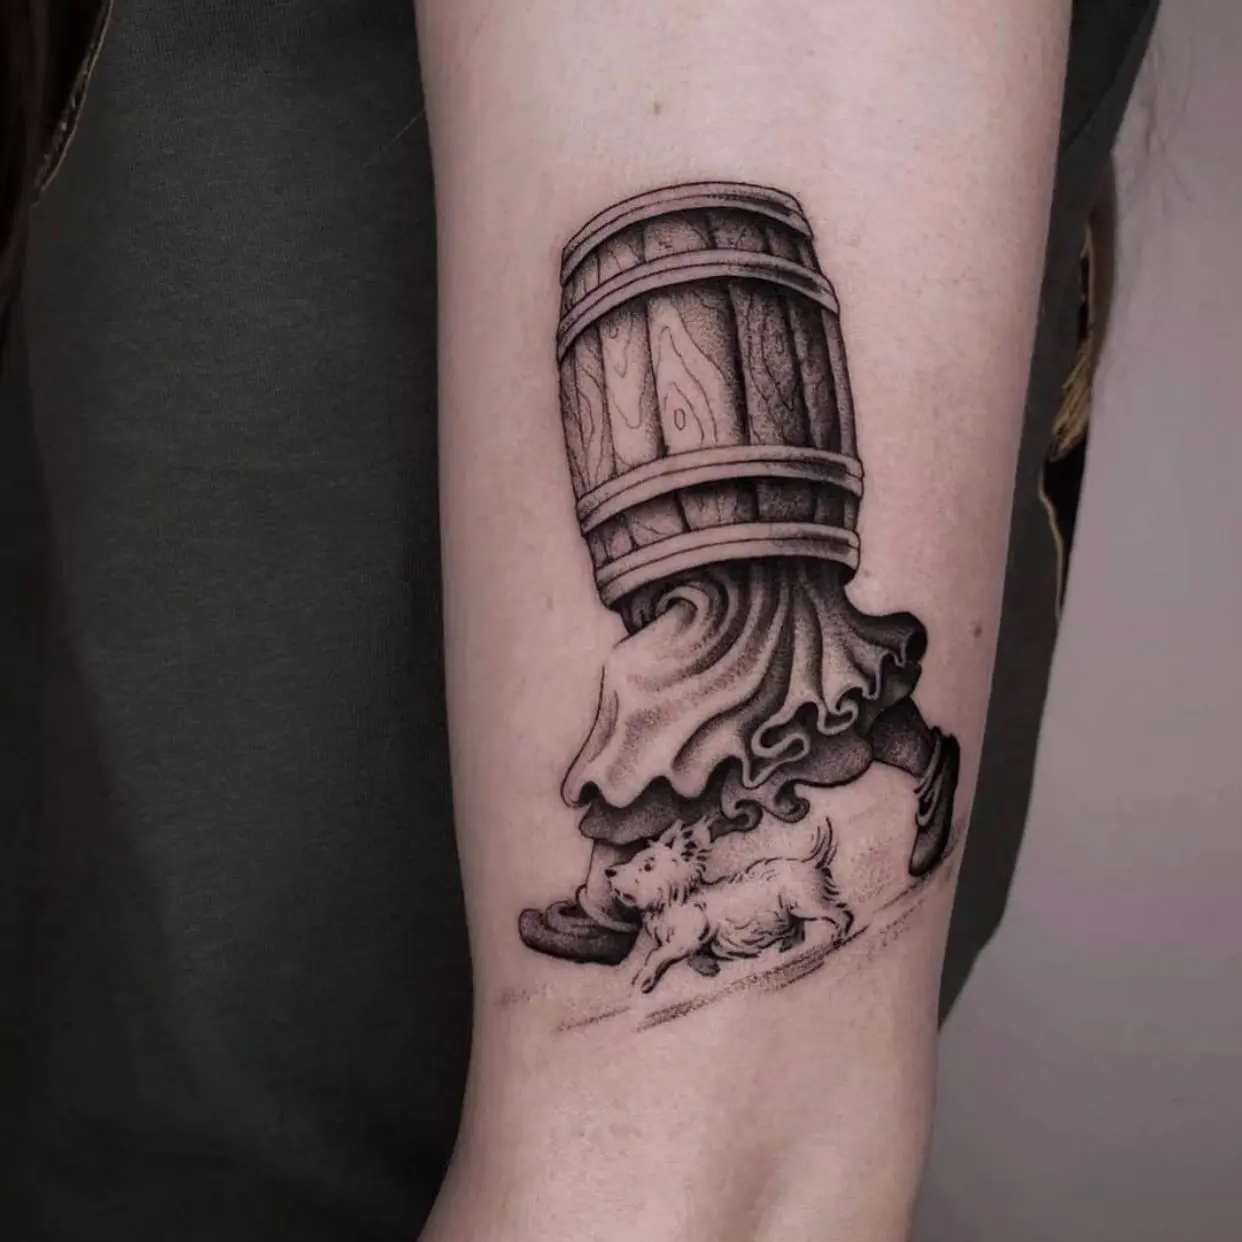 @vik_b_tattooer is obsessed with his barrel people and would love to do more!! At the moment his books are closed until November 16th but reception are more than happy to price any ideas you may have for Vik, so when his books do open, we will be able to book you in 🥳
—-

studioxiii tattoos tattooed tattooflash blackworkers bandg realism realistictattoo skull skinartmag skulltattoo lion liontattoo tattooartist edinburghtattooartist edinburghtattoo girltattoo blackclaw uktta ttt eztattoocartridges ukbta skindeep txtooing tattoomediaink thebesttattooartist tattoosnob tattooartistic